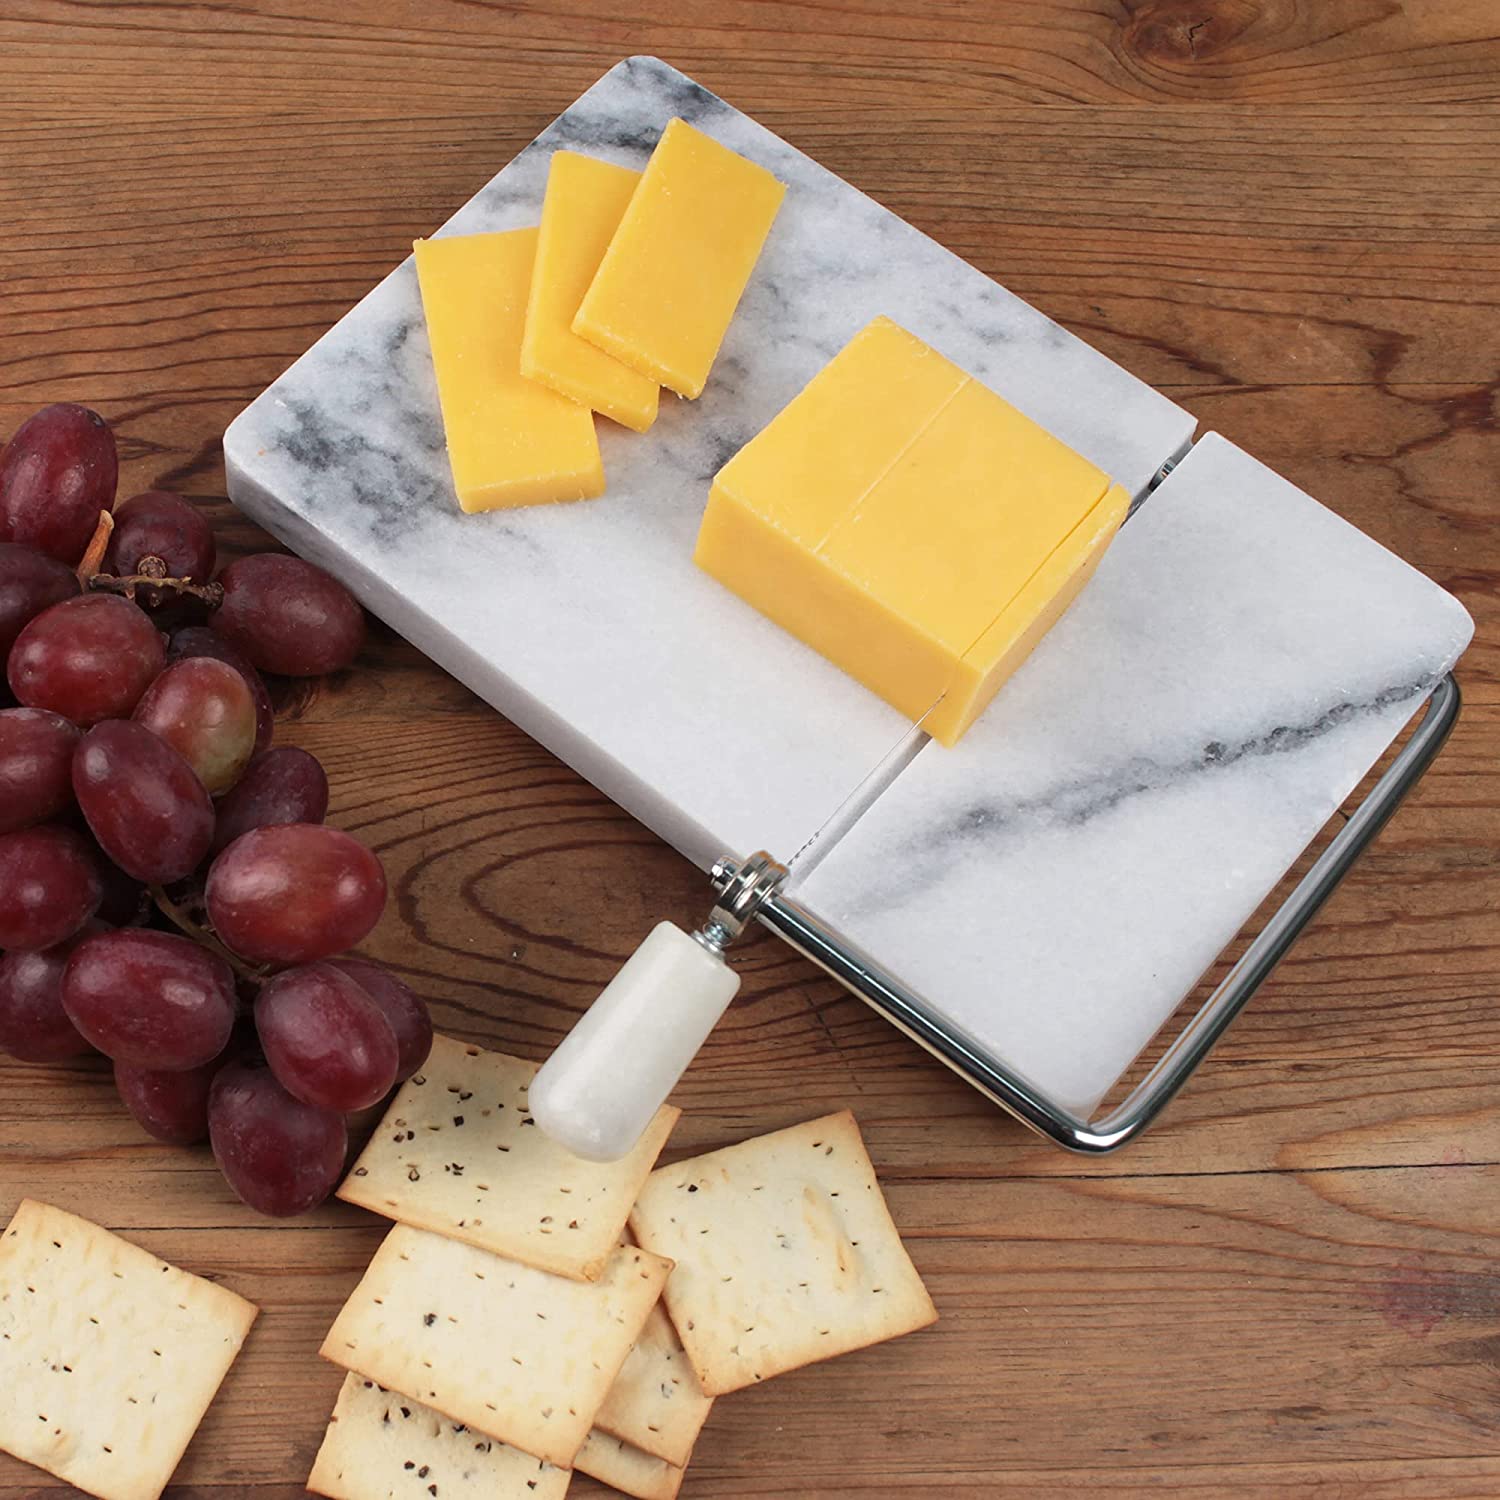 RSVP International White Marble Cheese Slicer & Cutting Board, 5 x 8 | Cut Cheeses, Meats, & Other Appetizers | Each Piece Unique in Marble Coloring | Stainless Steel Wire Cheese Slicer